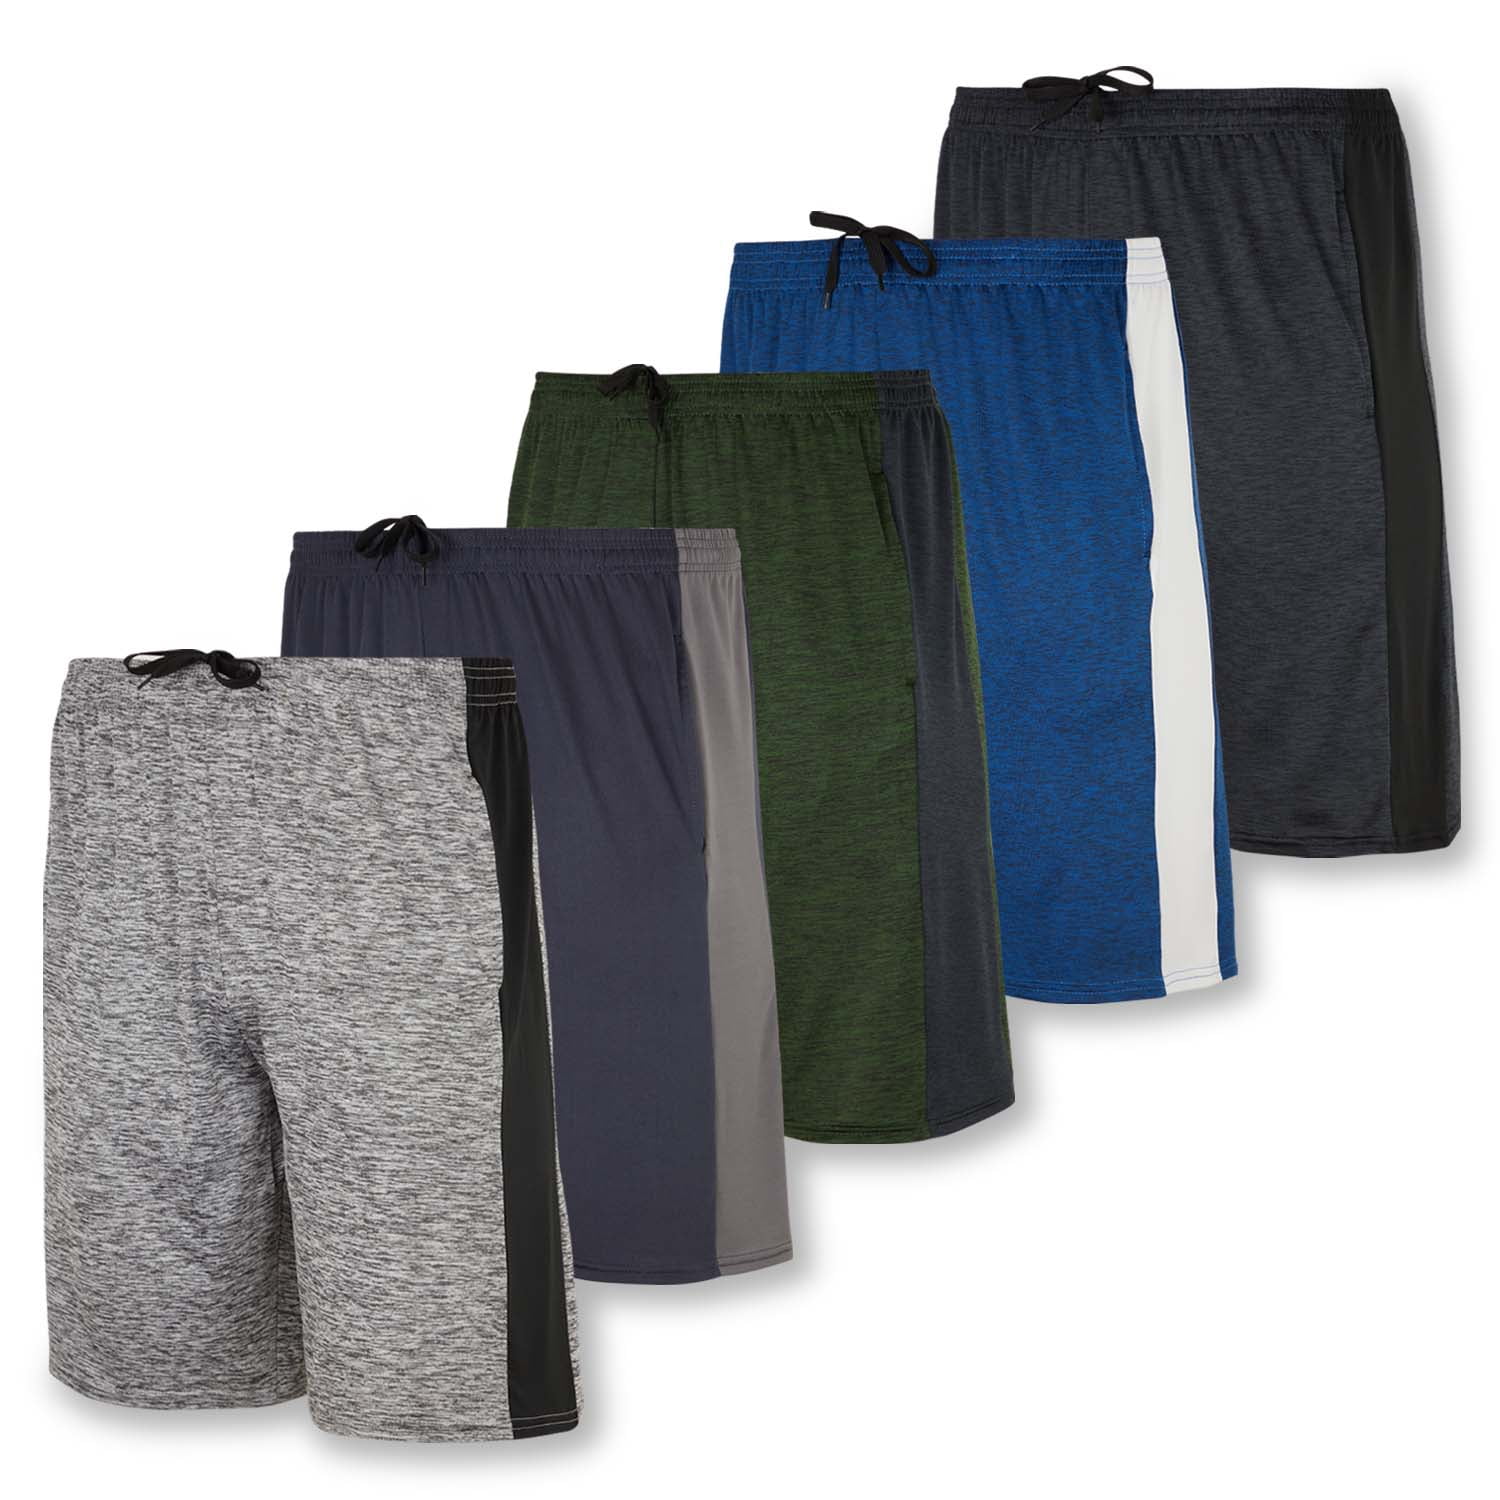 Real Essentials 5 Pack: Men's Dry-Fit Sweat Resistant Active Athletic ...